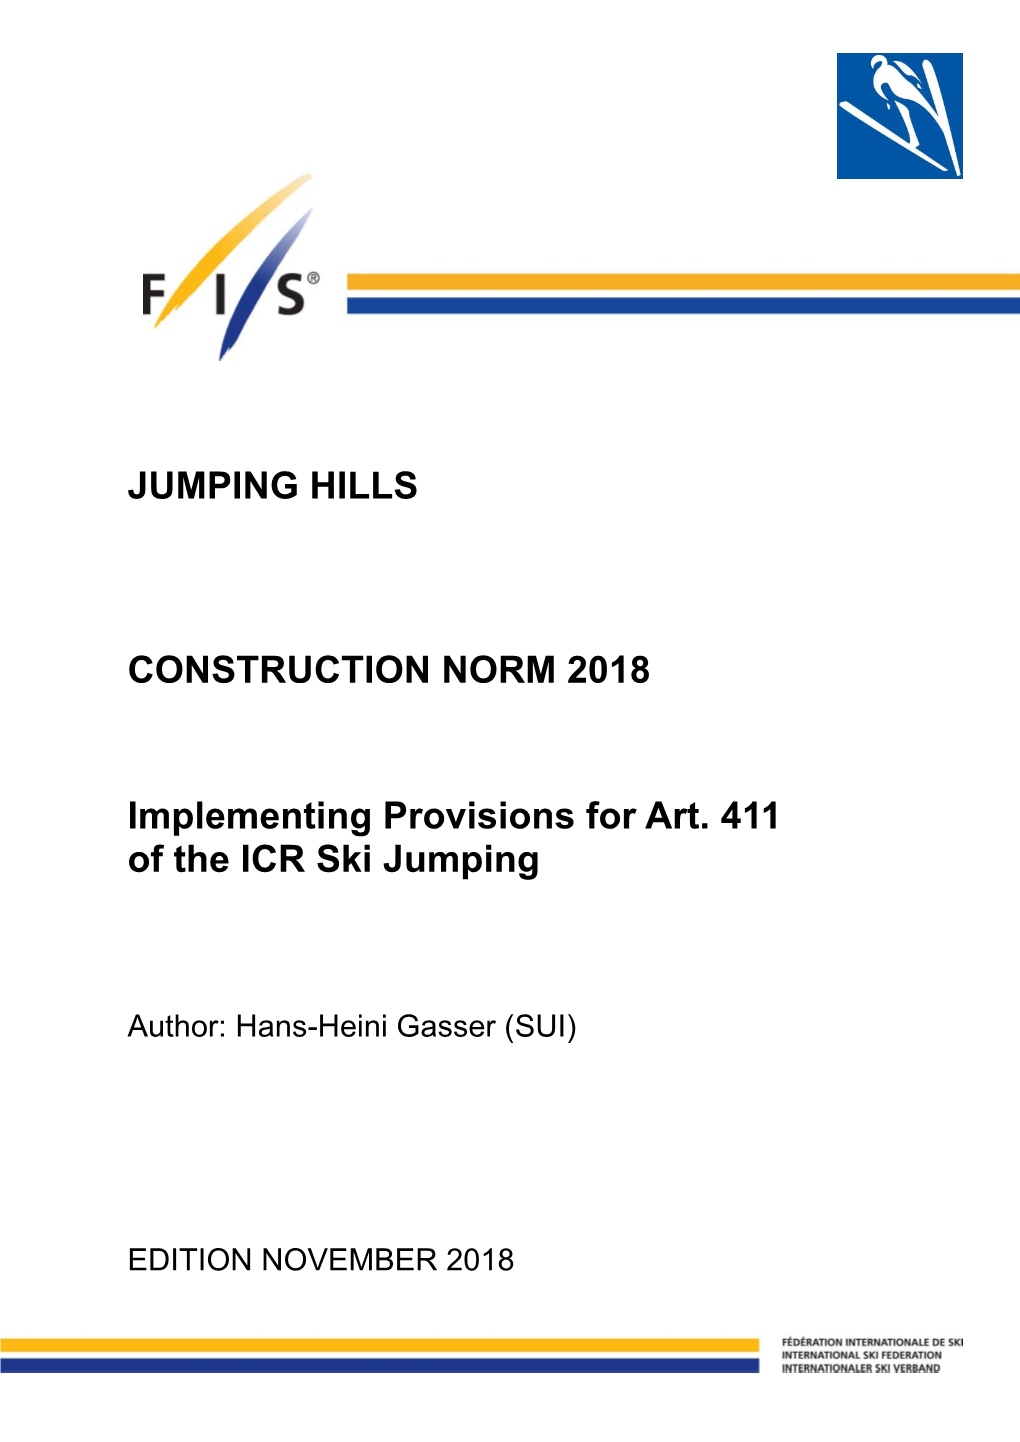 JUMPING HILLS CONSTRUCTION NORM 2018 Implementing